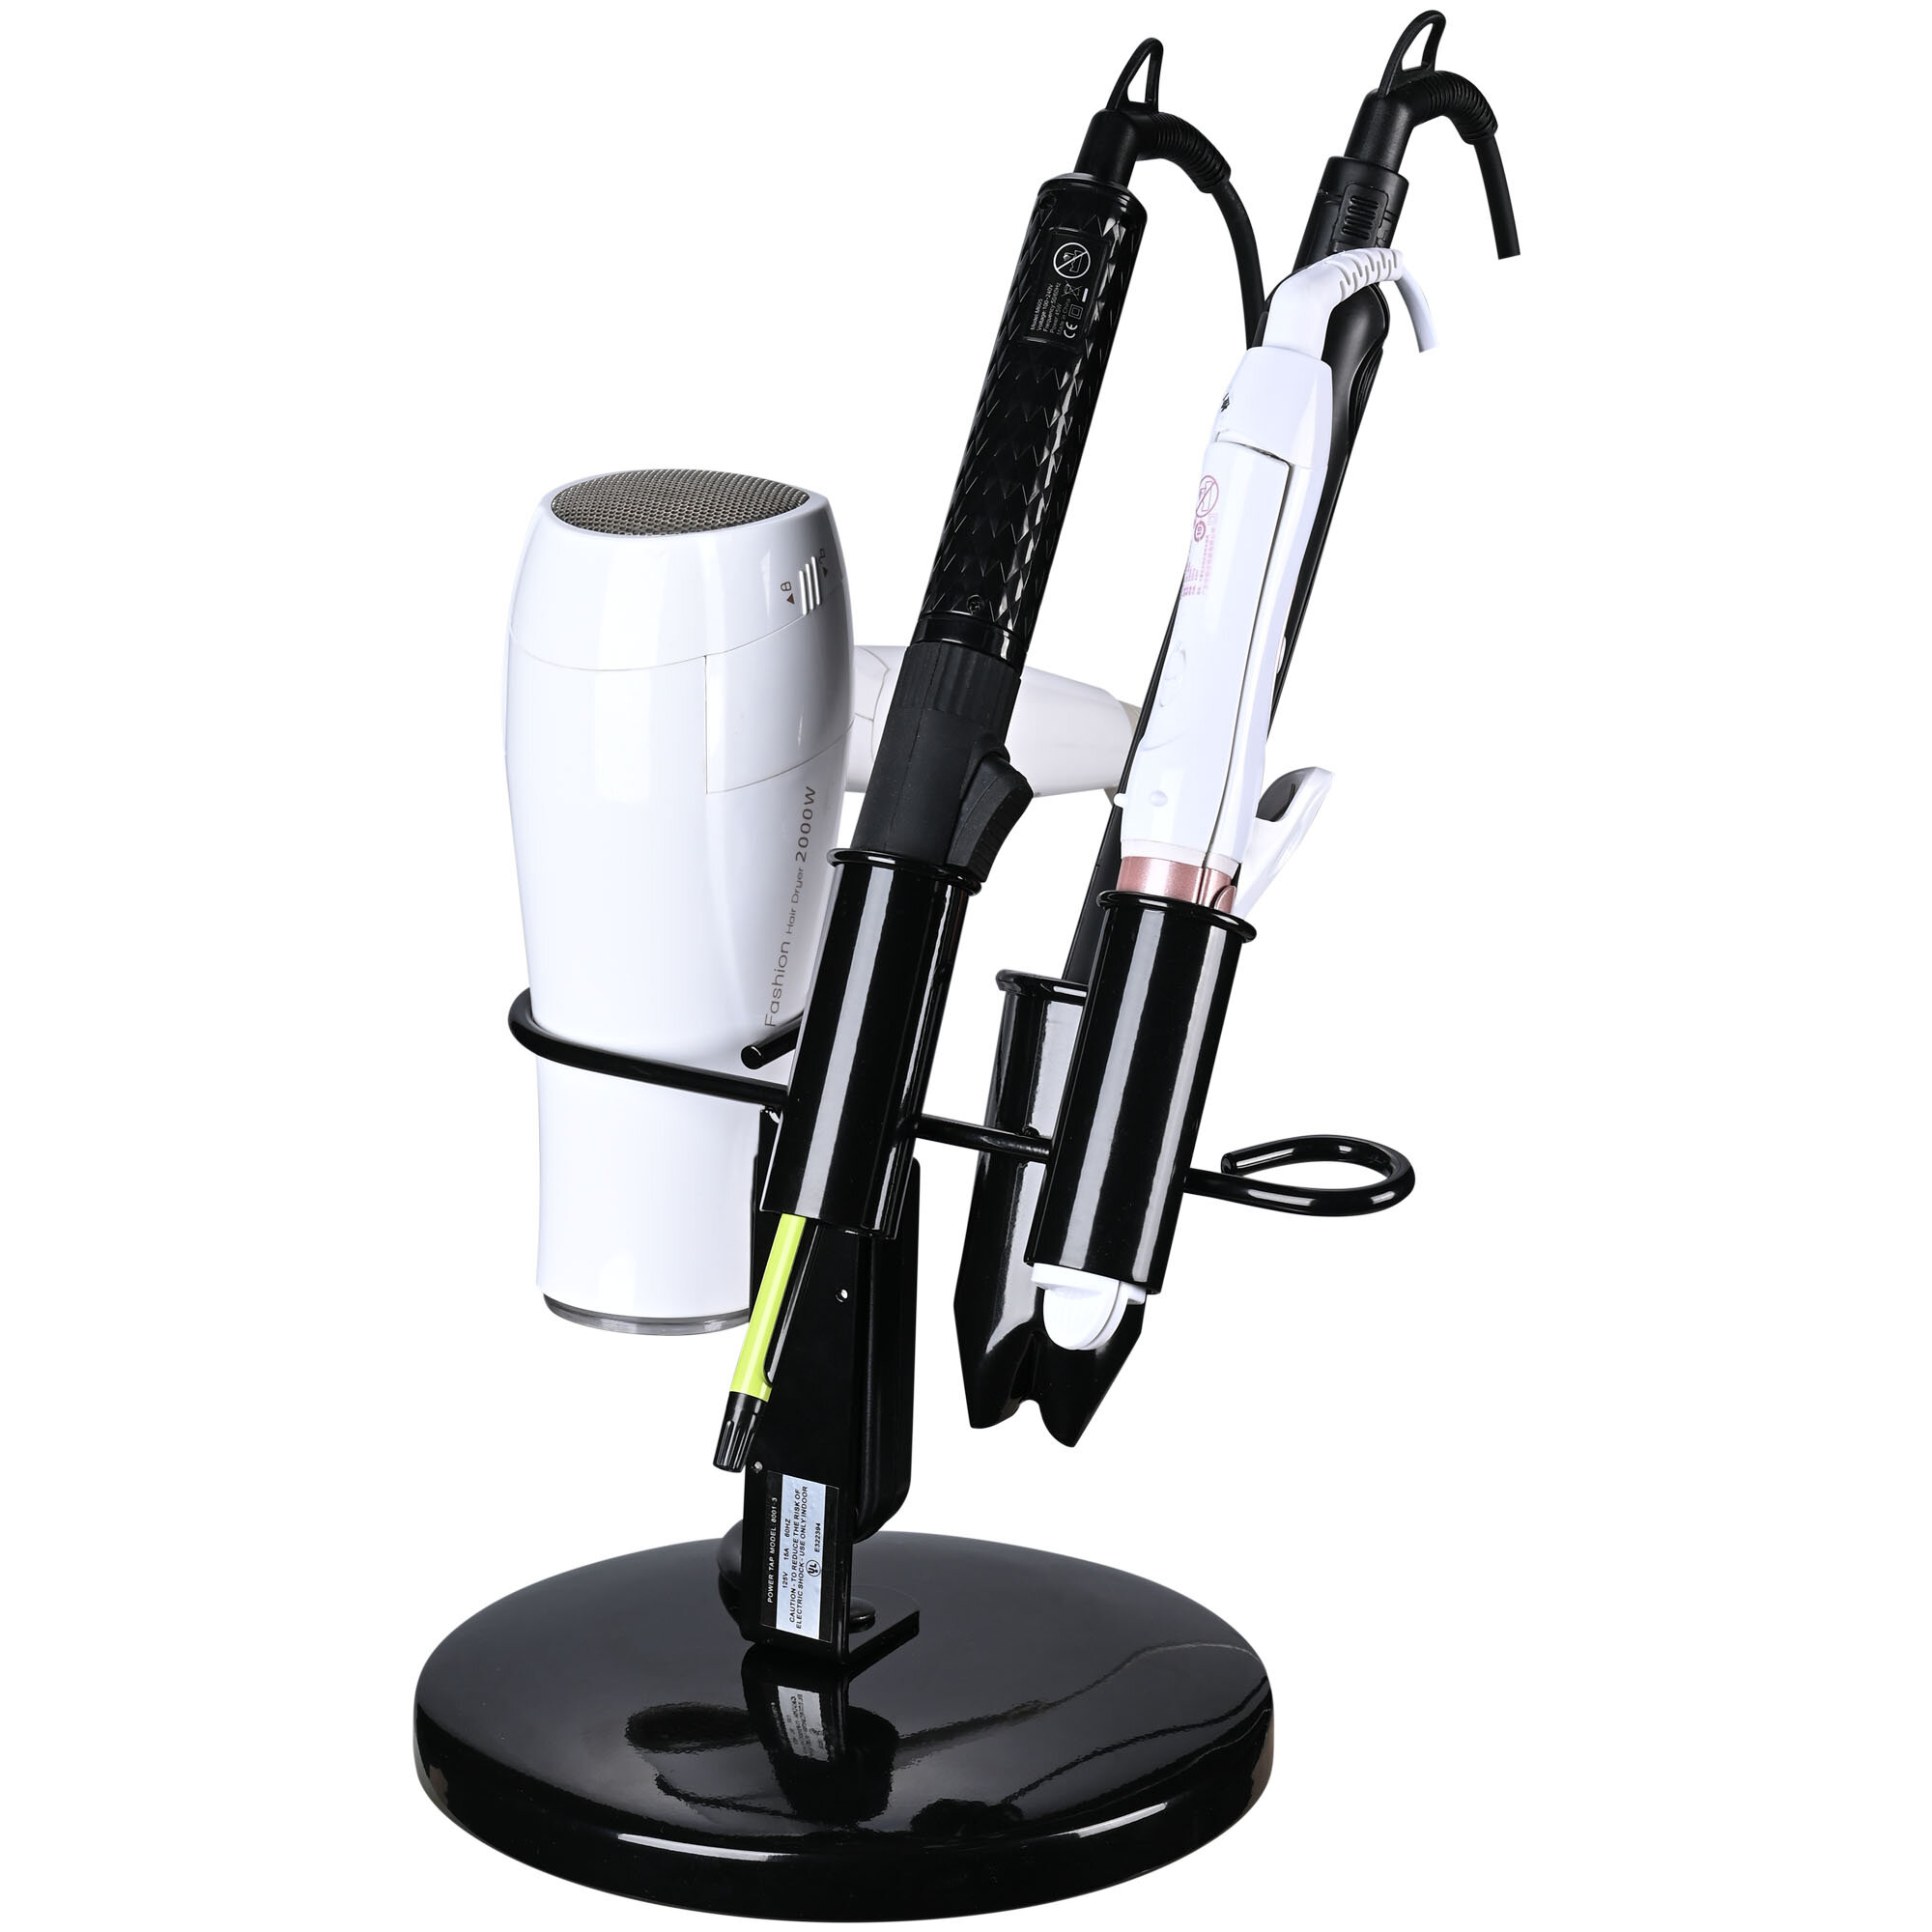 Freestanding Hair Dryer & Straighteners Holder Storage Stand Cable Tidy Rack